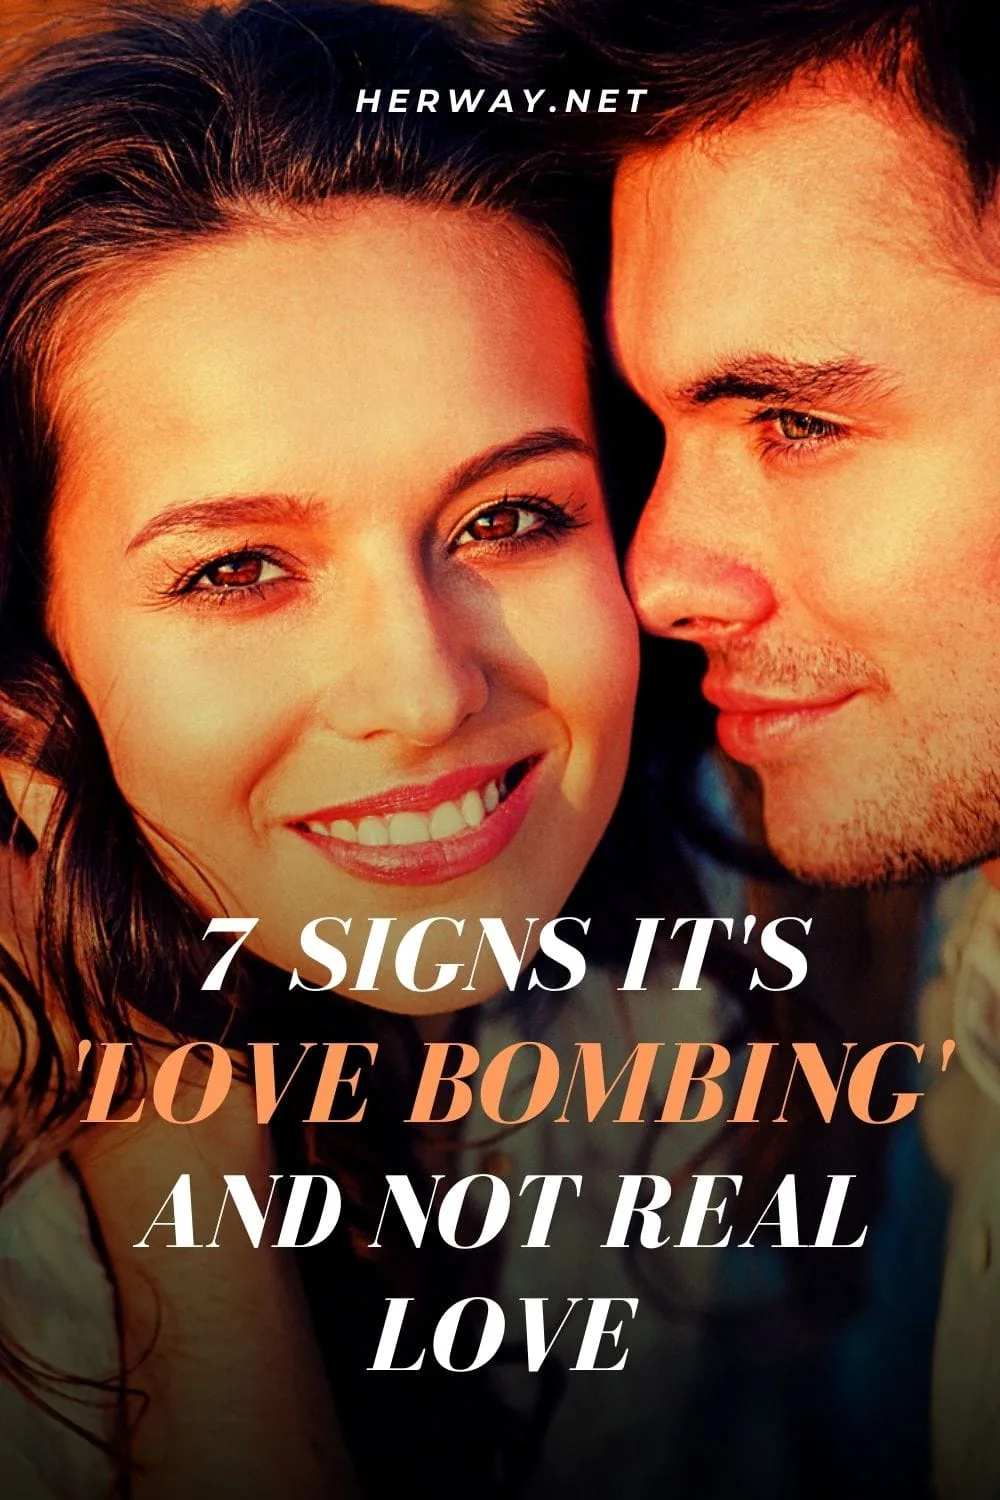 7 Signs It's 'Love Bombing' And Not Real Love